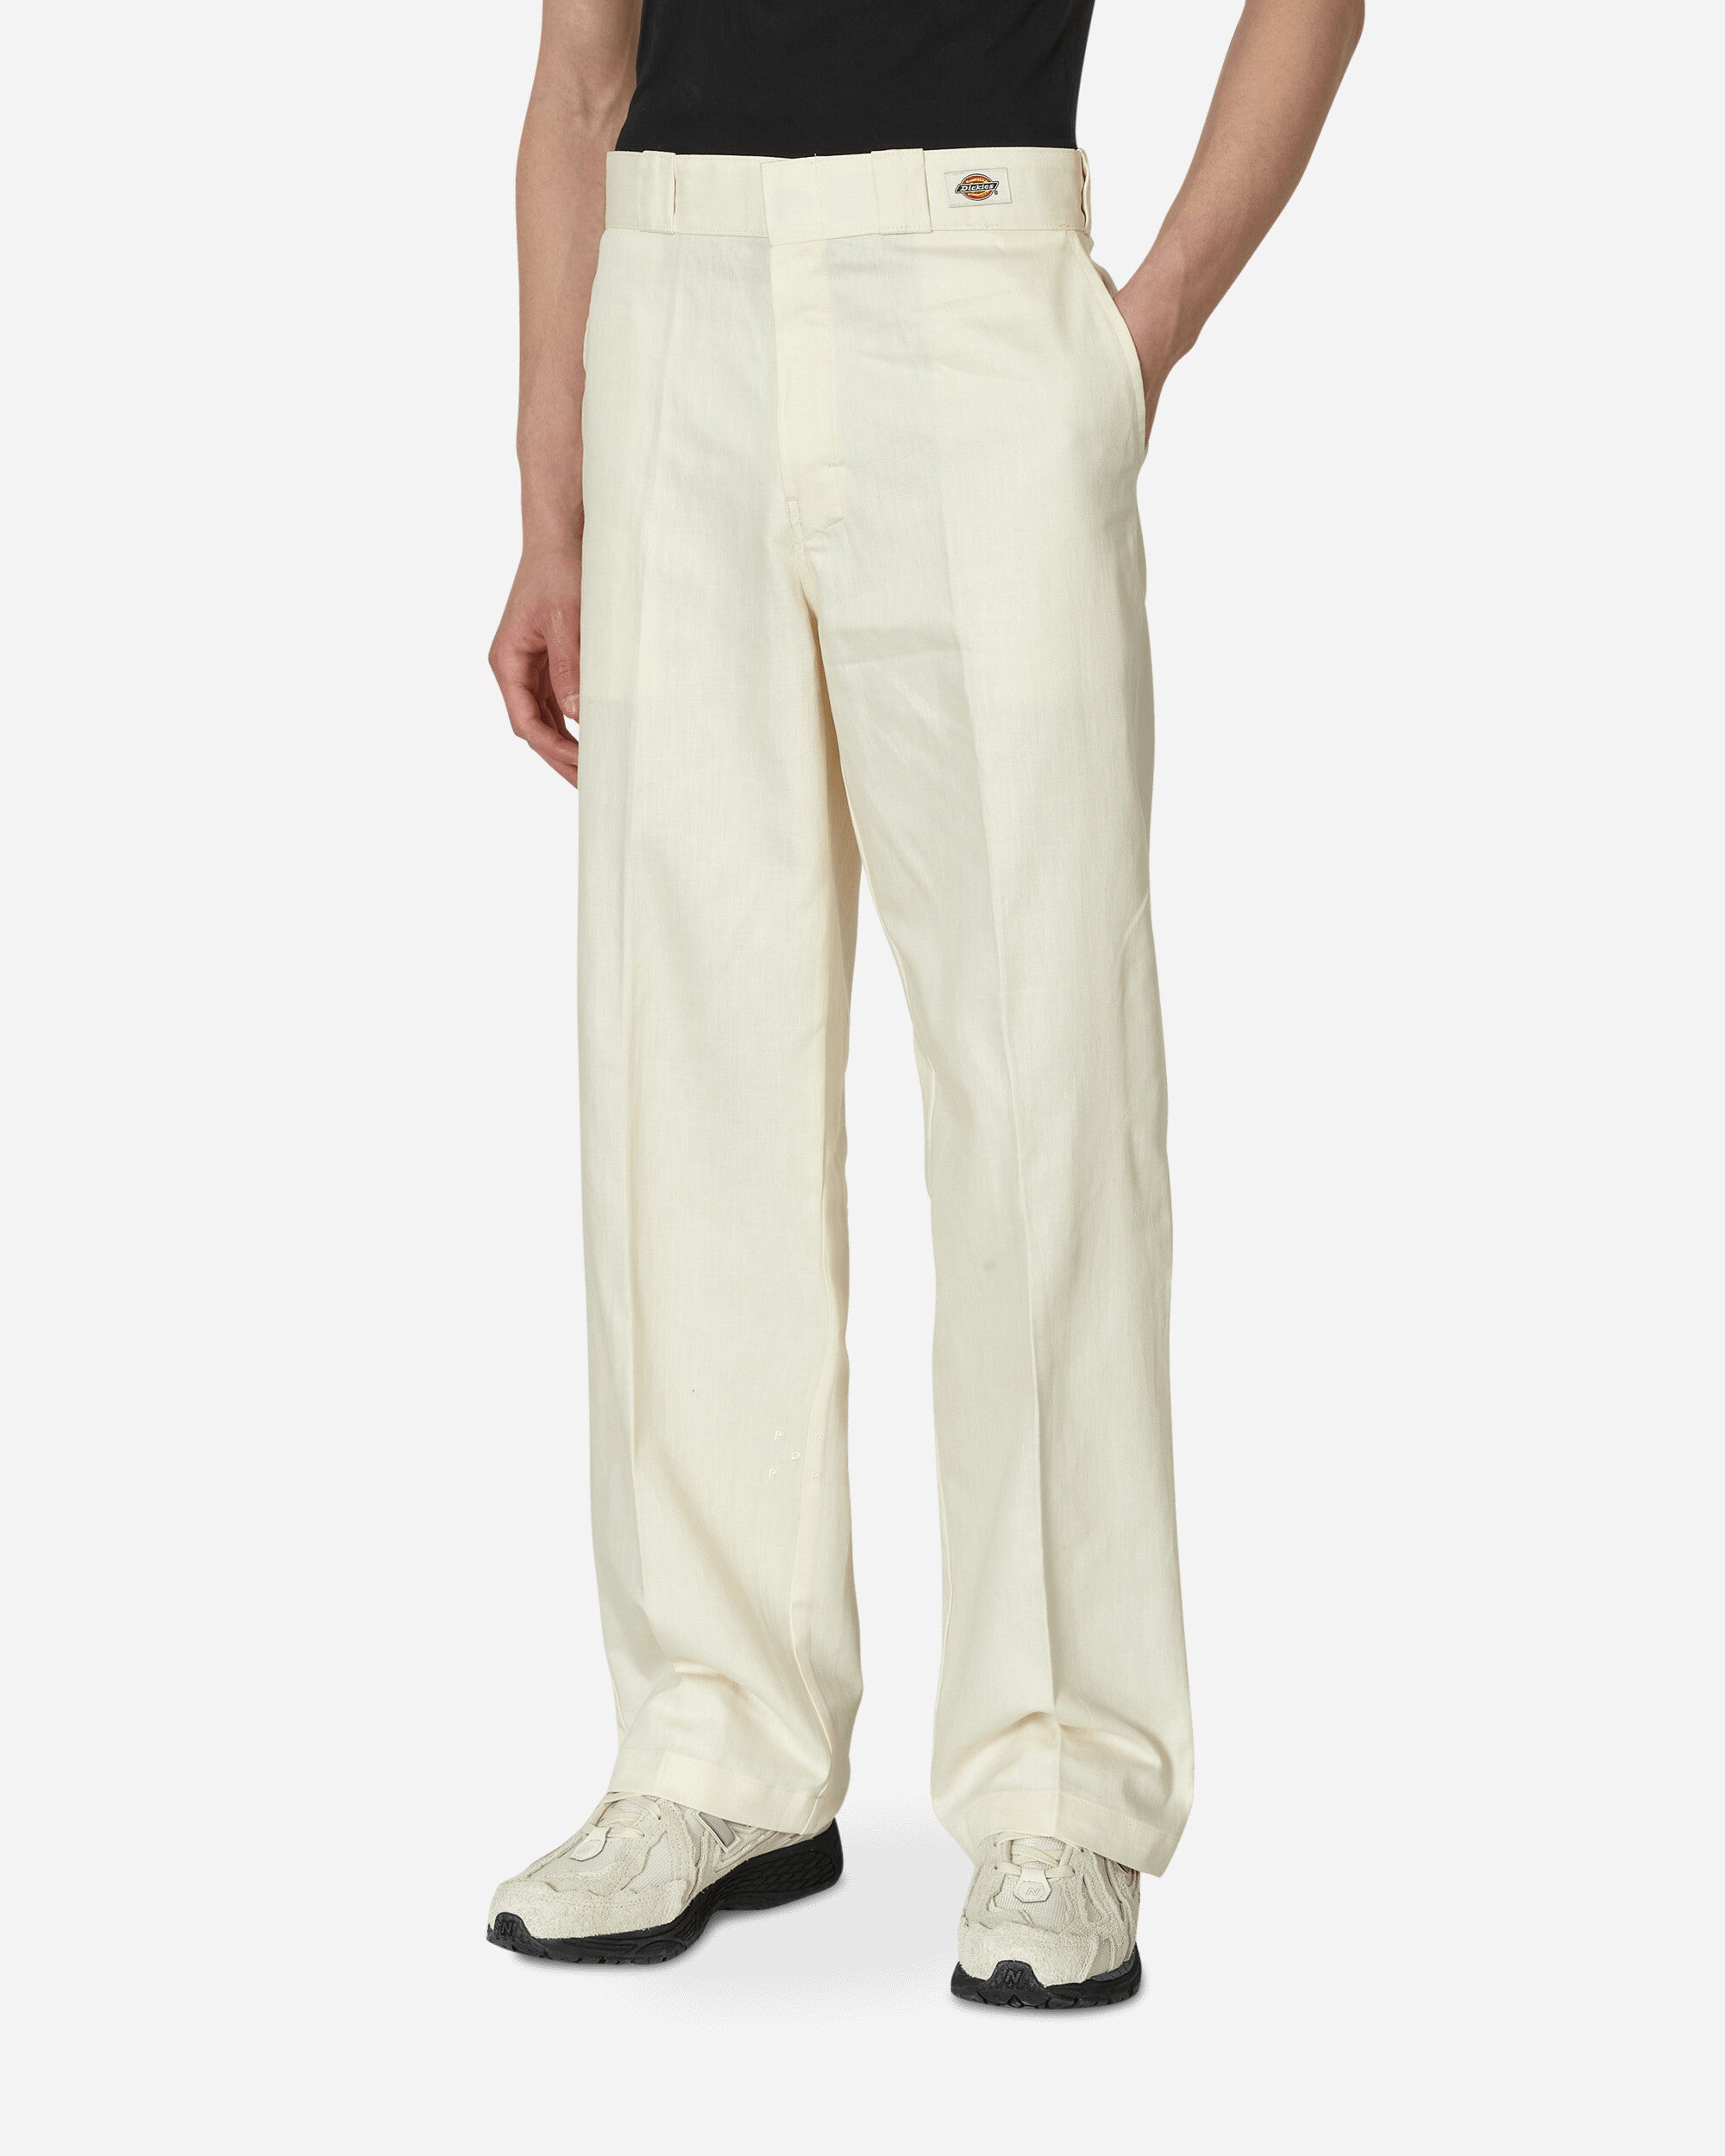 Pop Trading Company Work Pant Off White